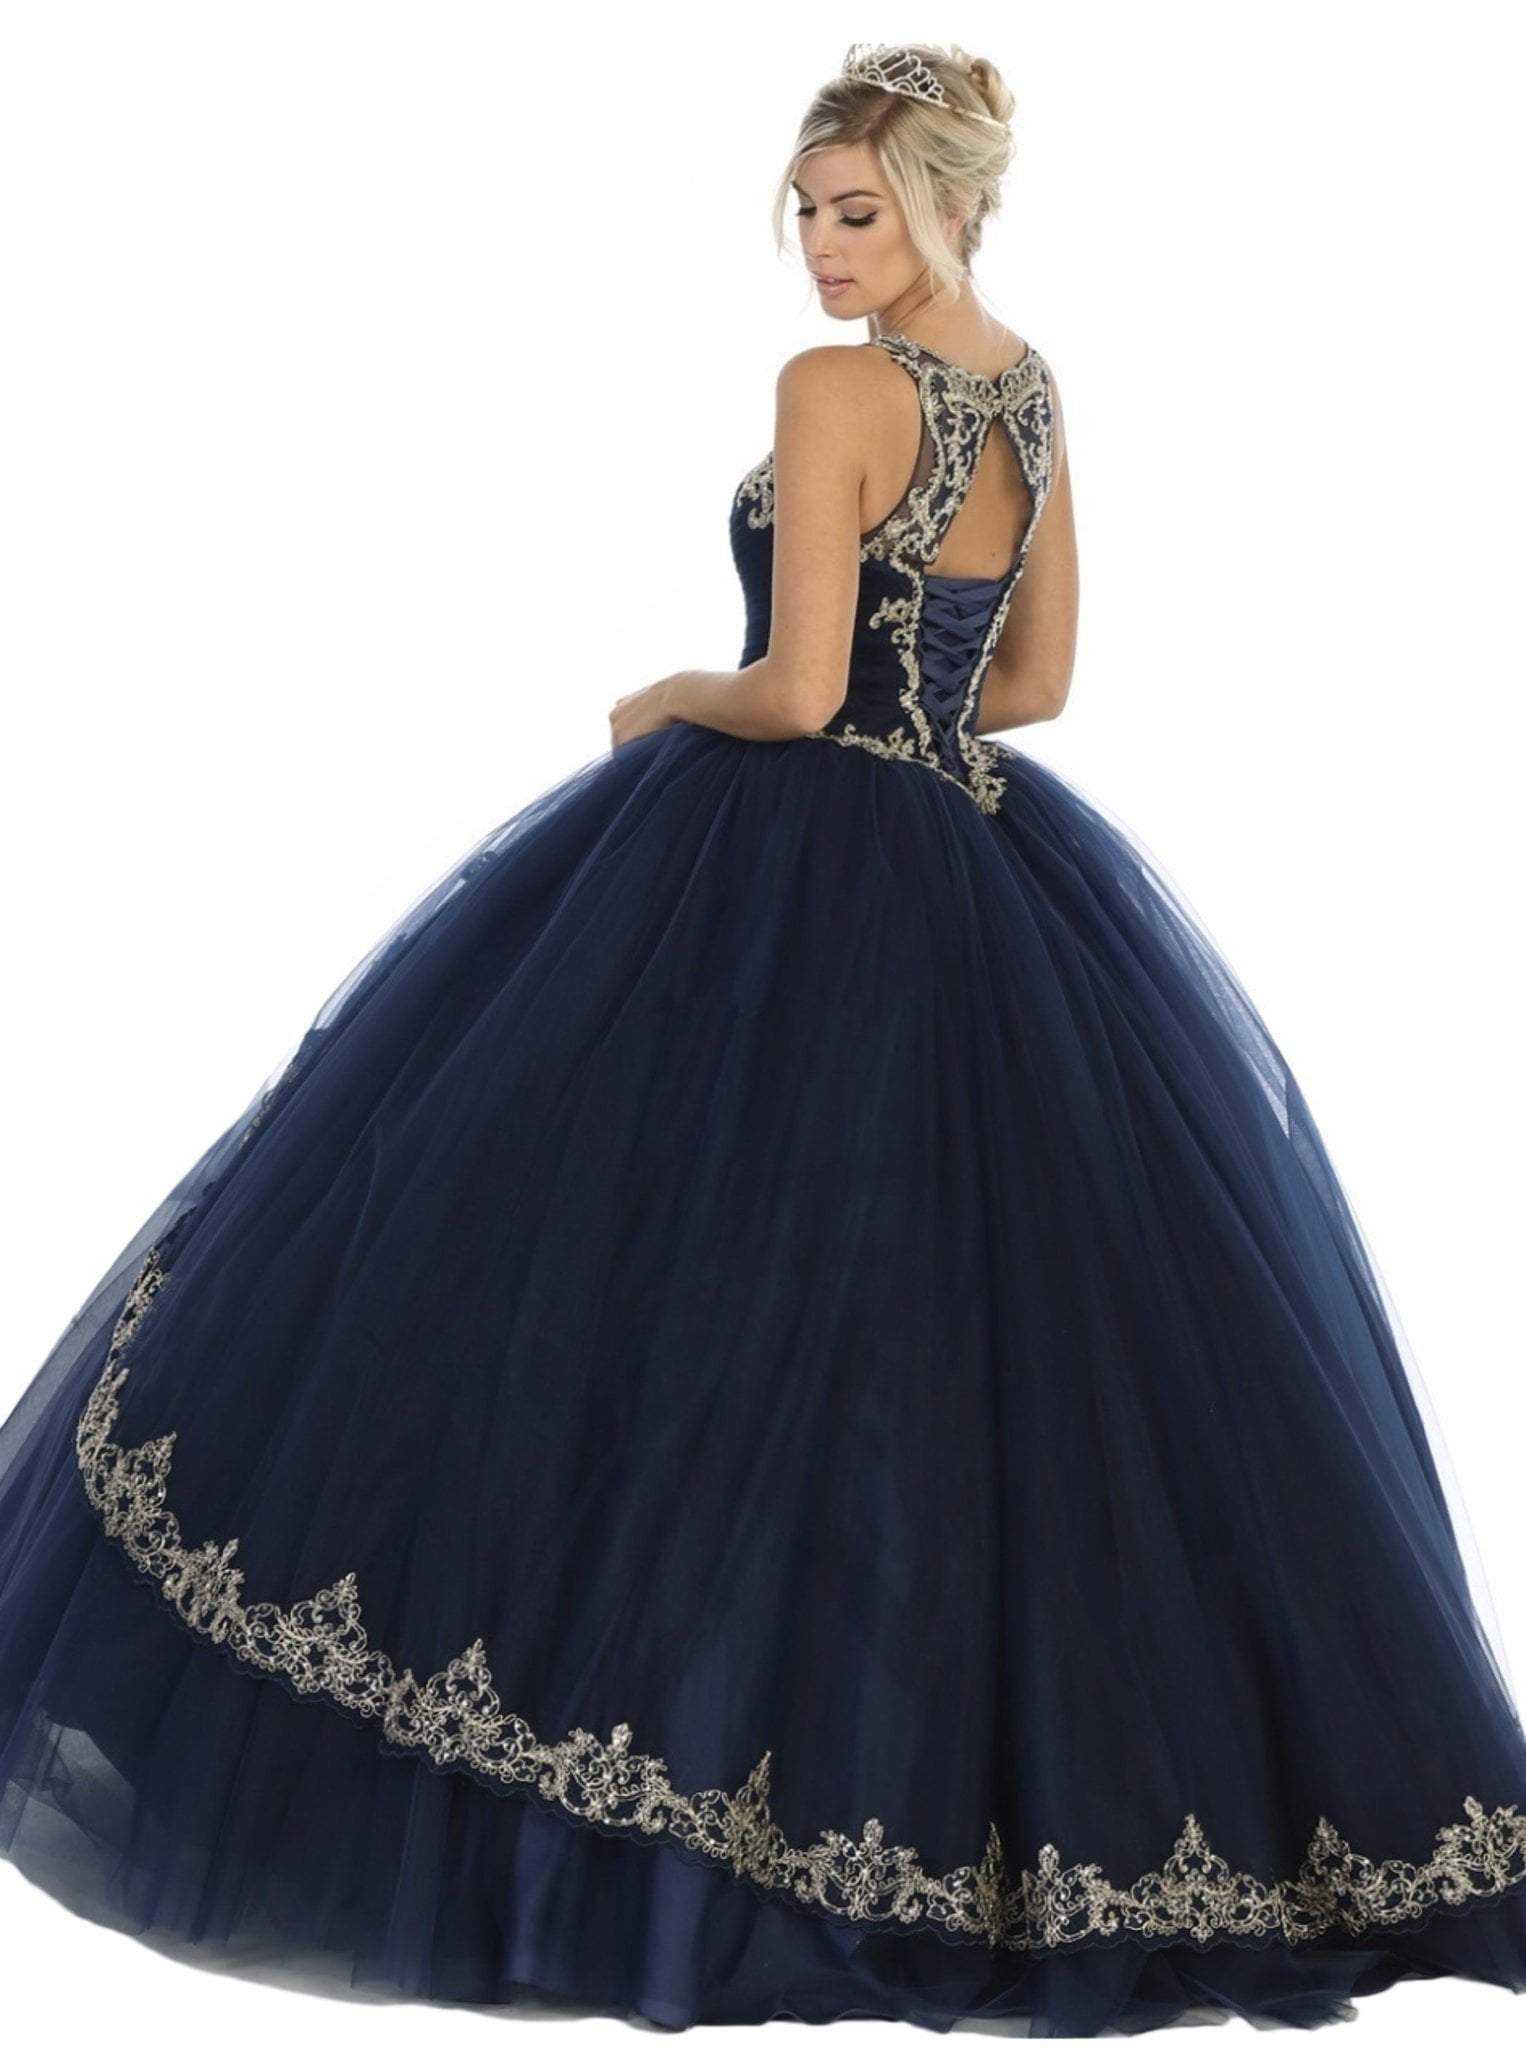 May Queen, May Queen - Scoop Appliqued Pleated Ballgown LK117 - 1 pc Navy/Gold In Size 18 Available